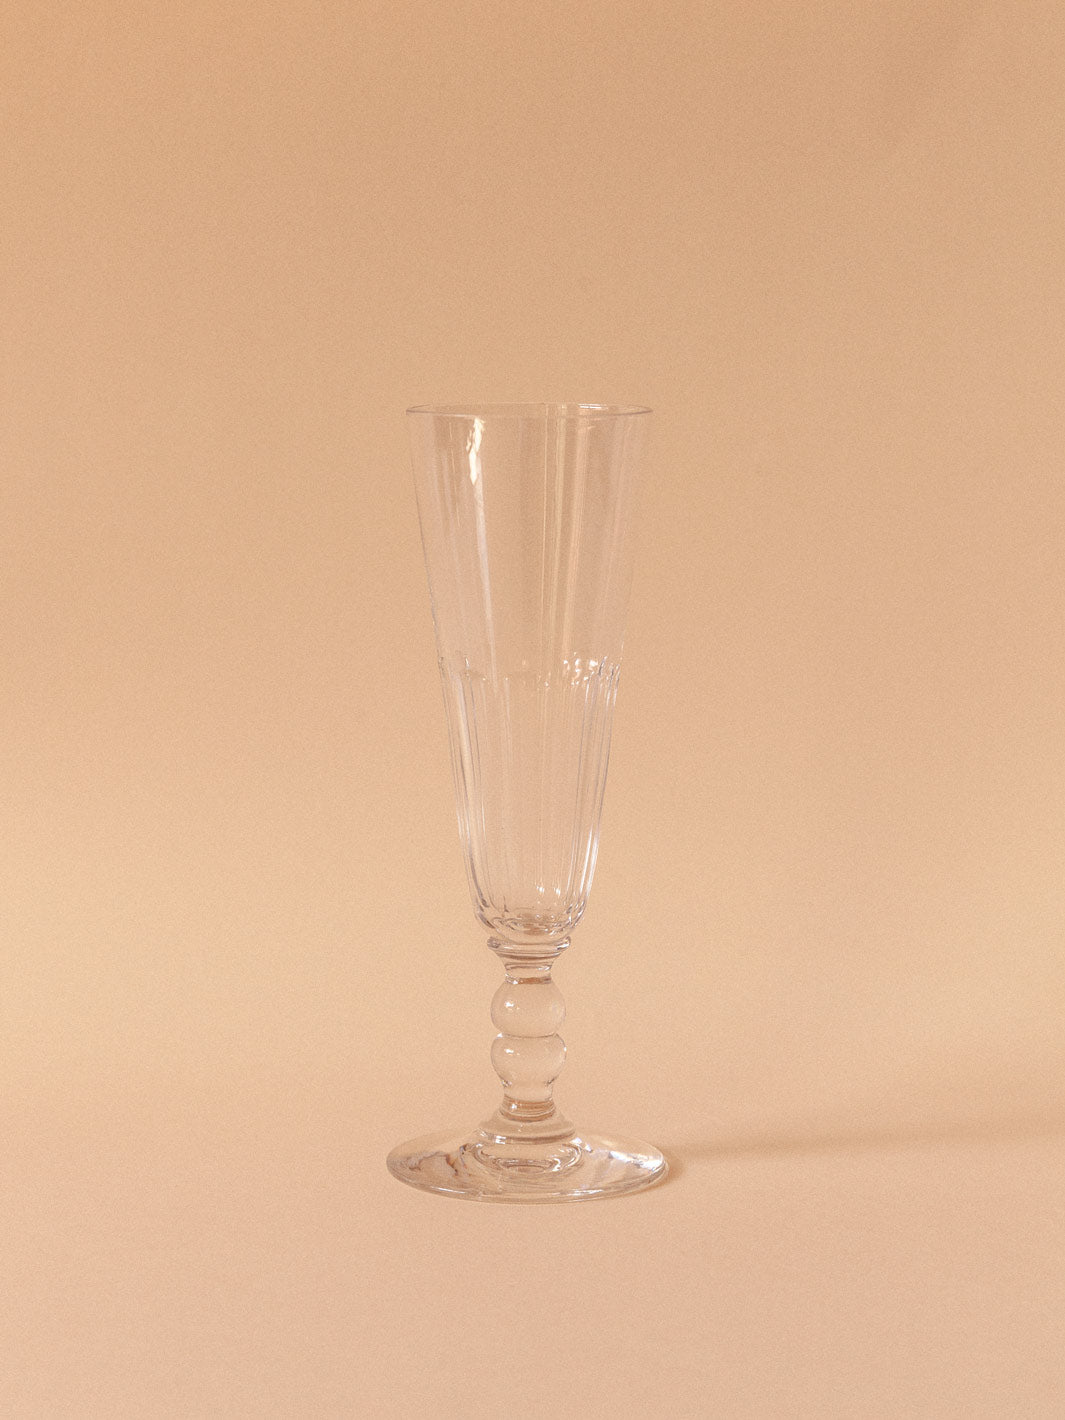 Suite of 4 flutes in champagne from 1920